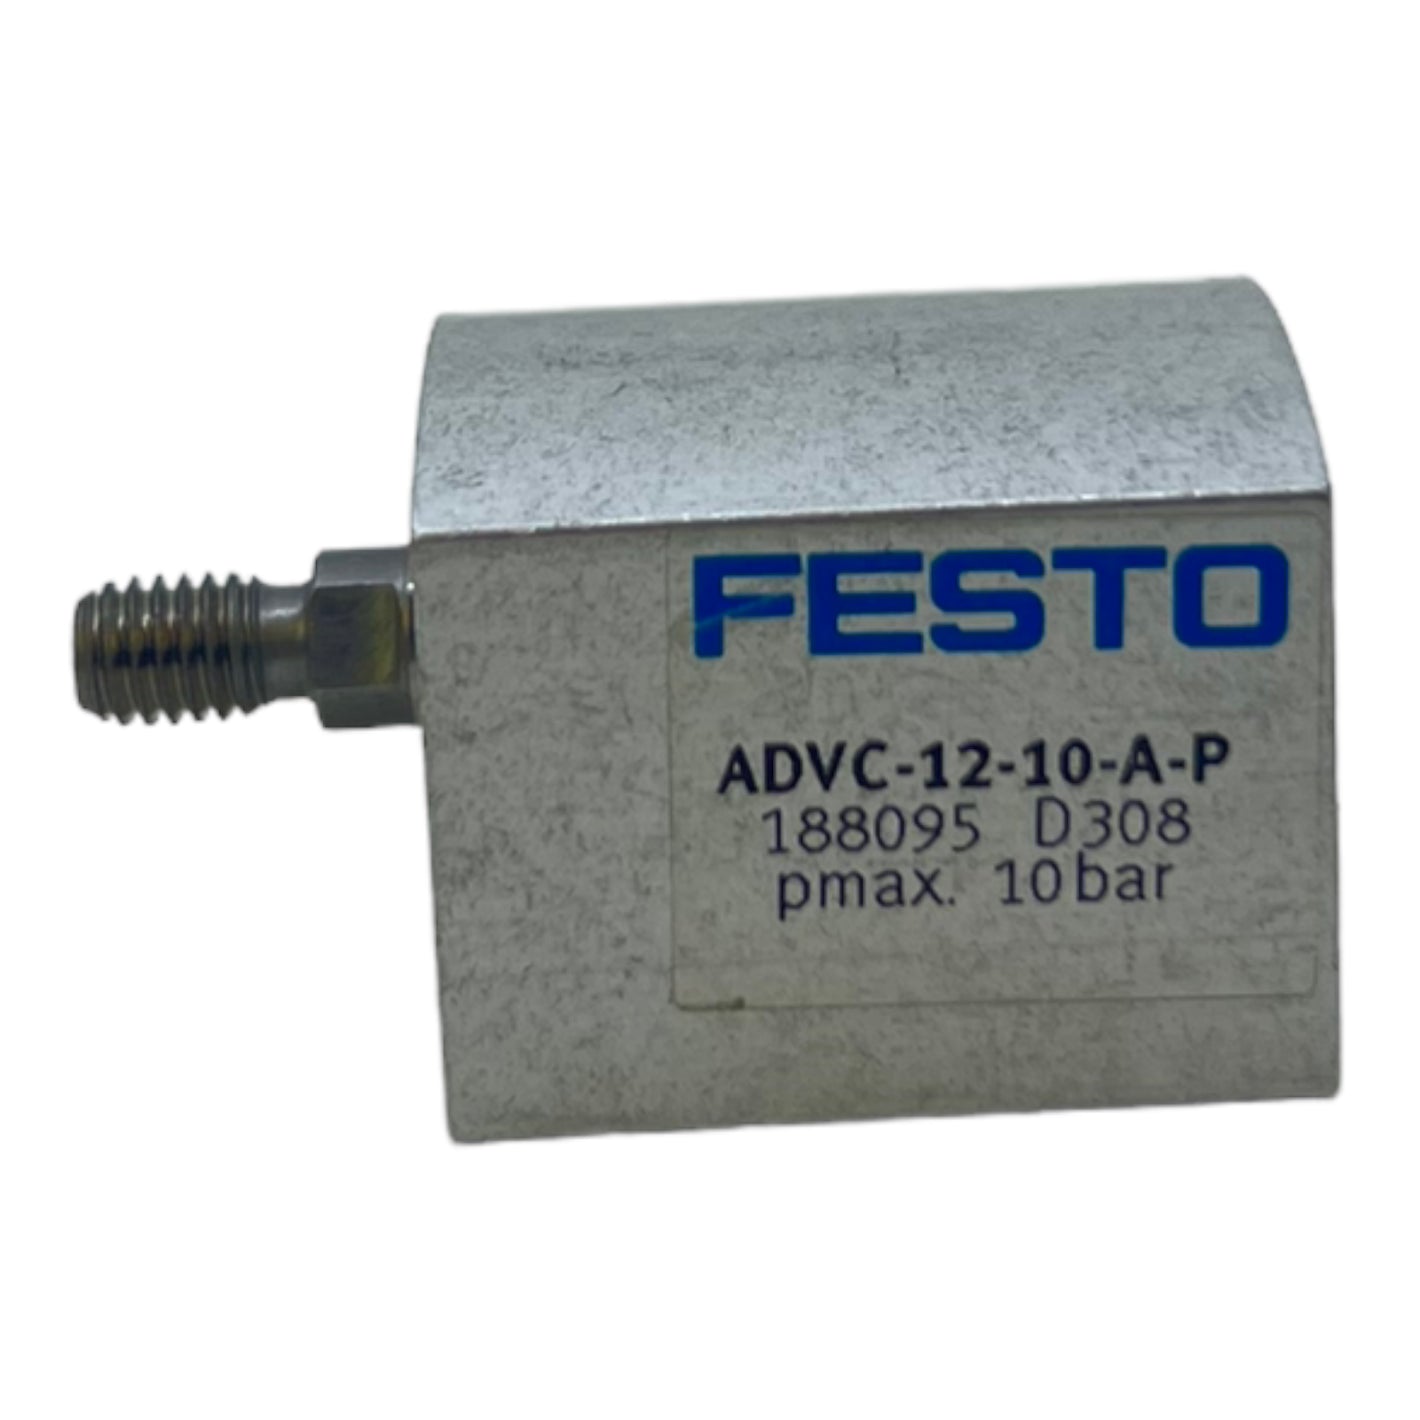 Festo ADVC-12-10-AP short stroke cylinder 188095 Ø12mm double-acting 1 to 10 bar 